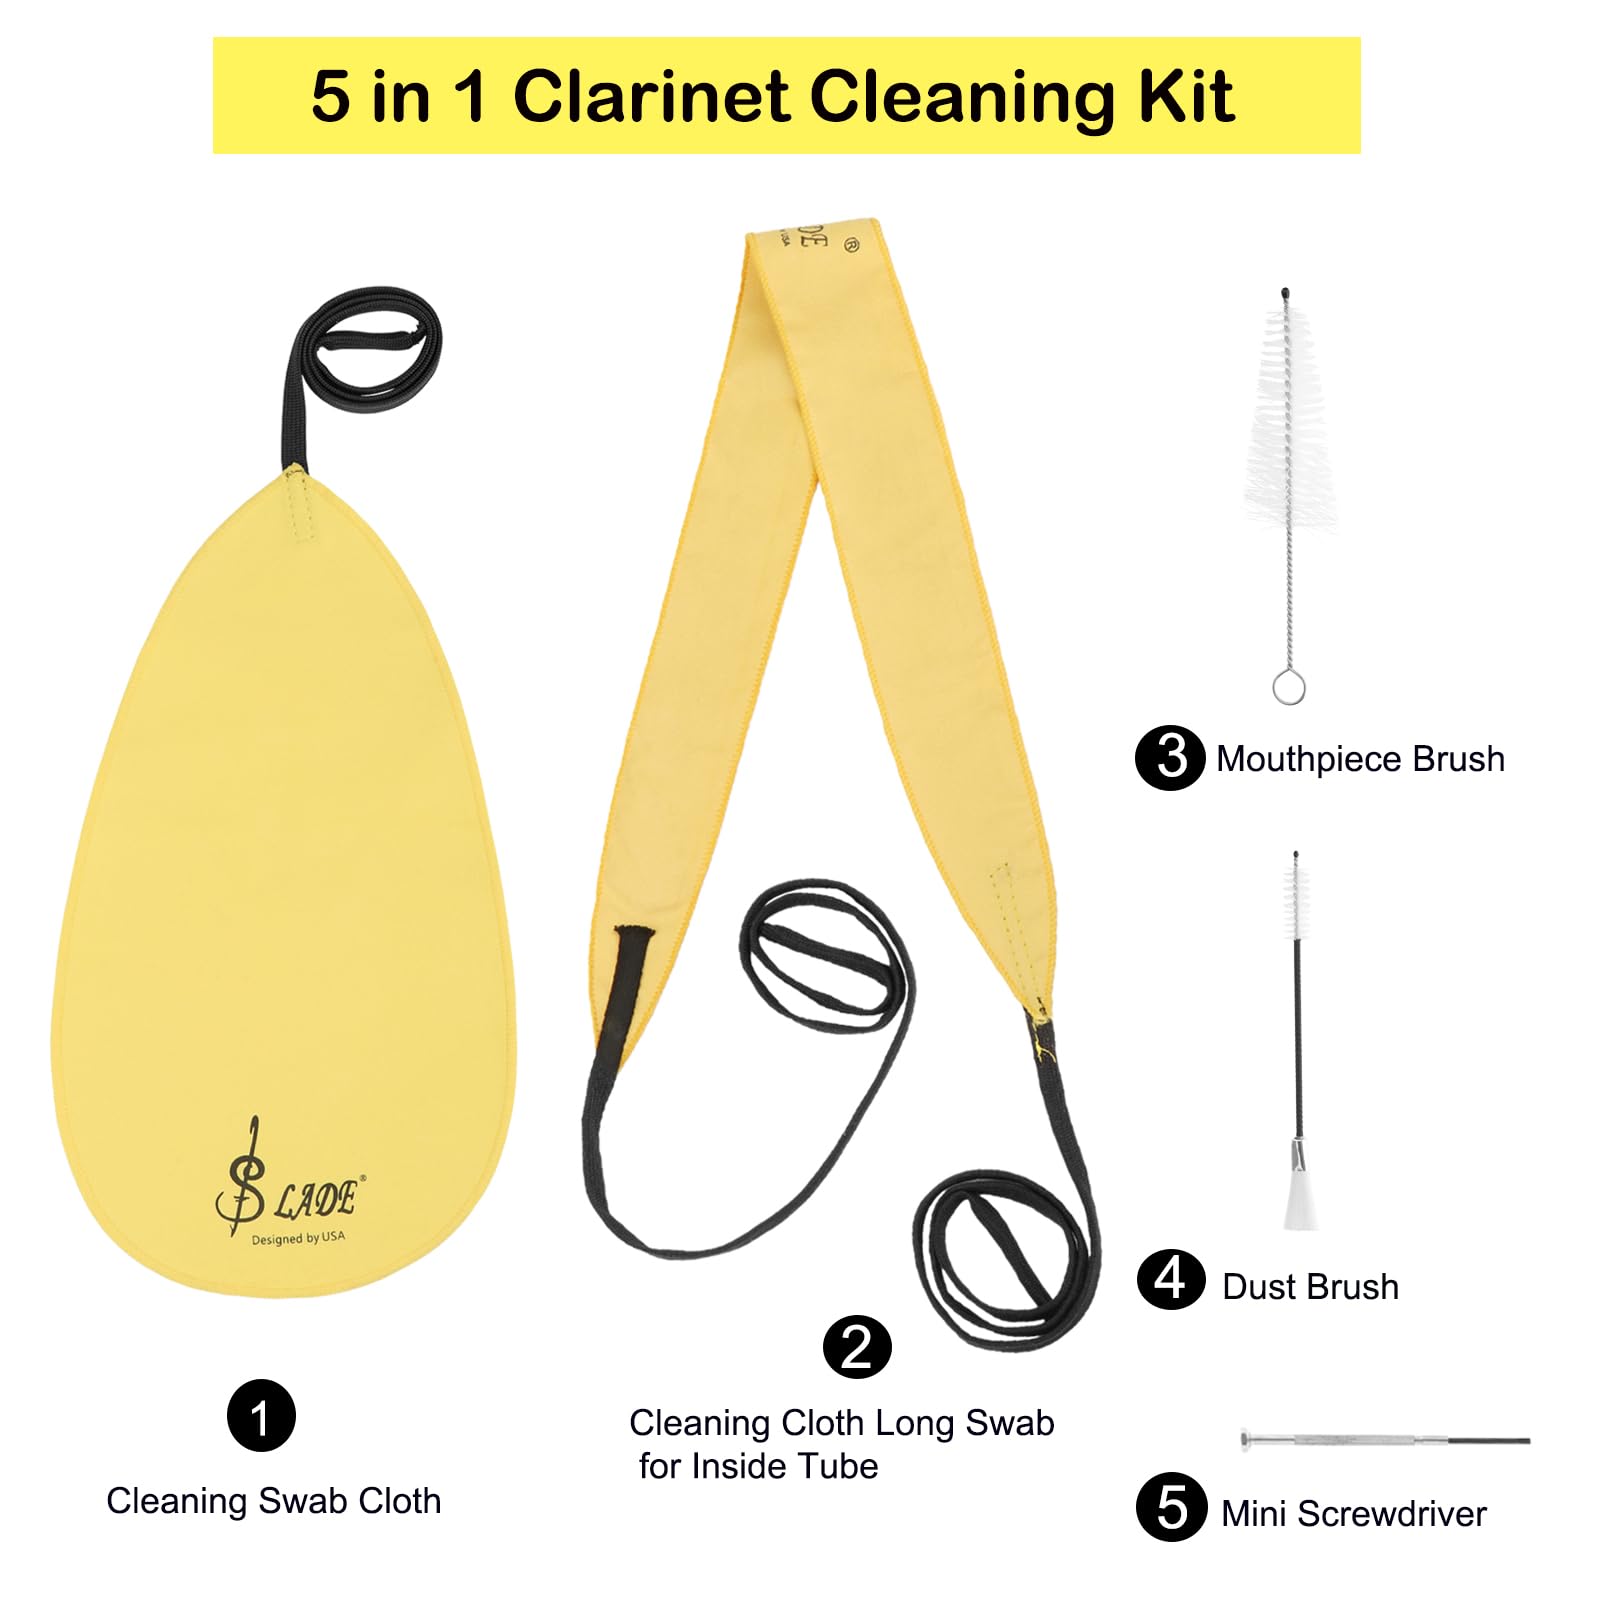 5 in 1 Clarinet Cleaning Kit Cloth All In One, Including Cleaning Long Swab Cloth, Mouthpiece Brush, Dust Brush, Mini Screwdriver Maintenance Kit For Wind & Woodwind Instrument